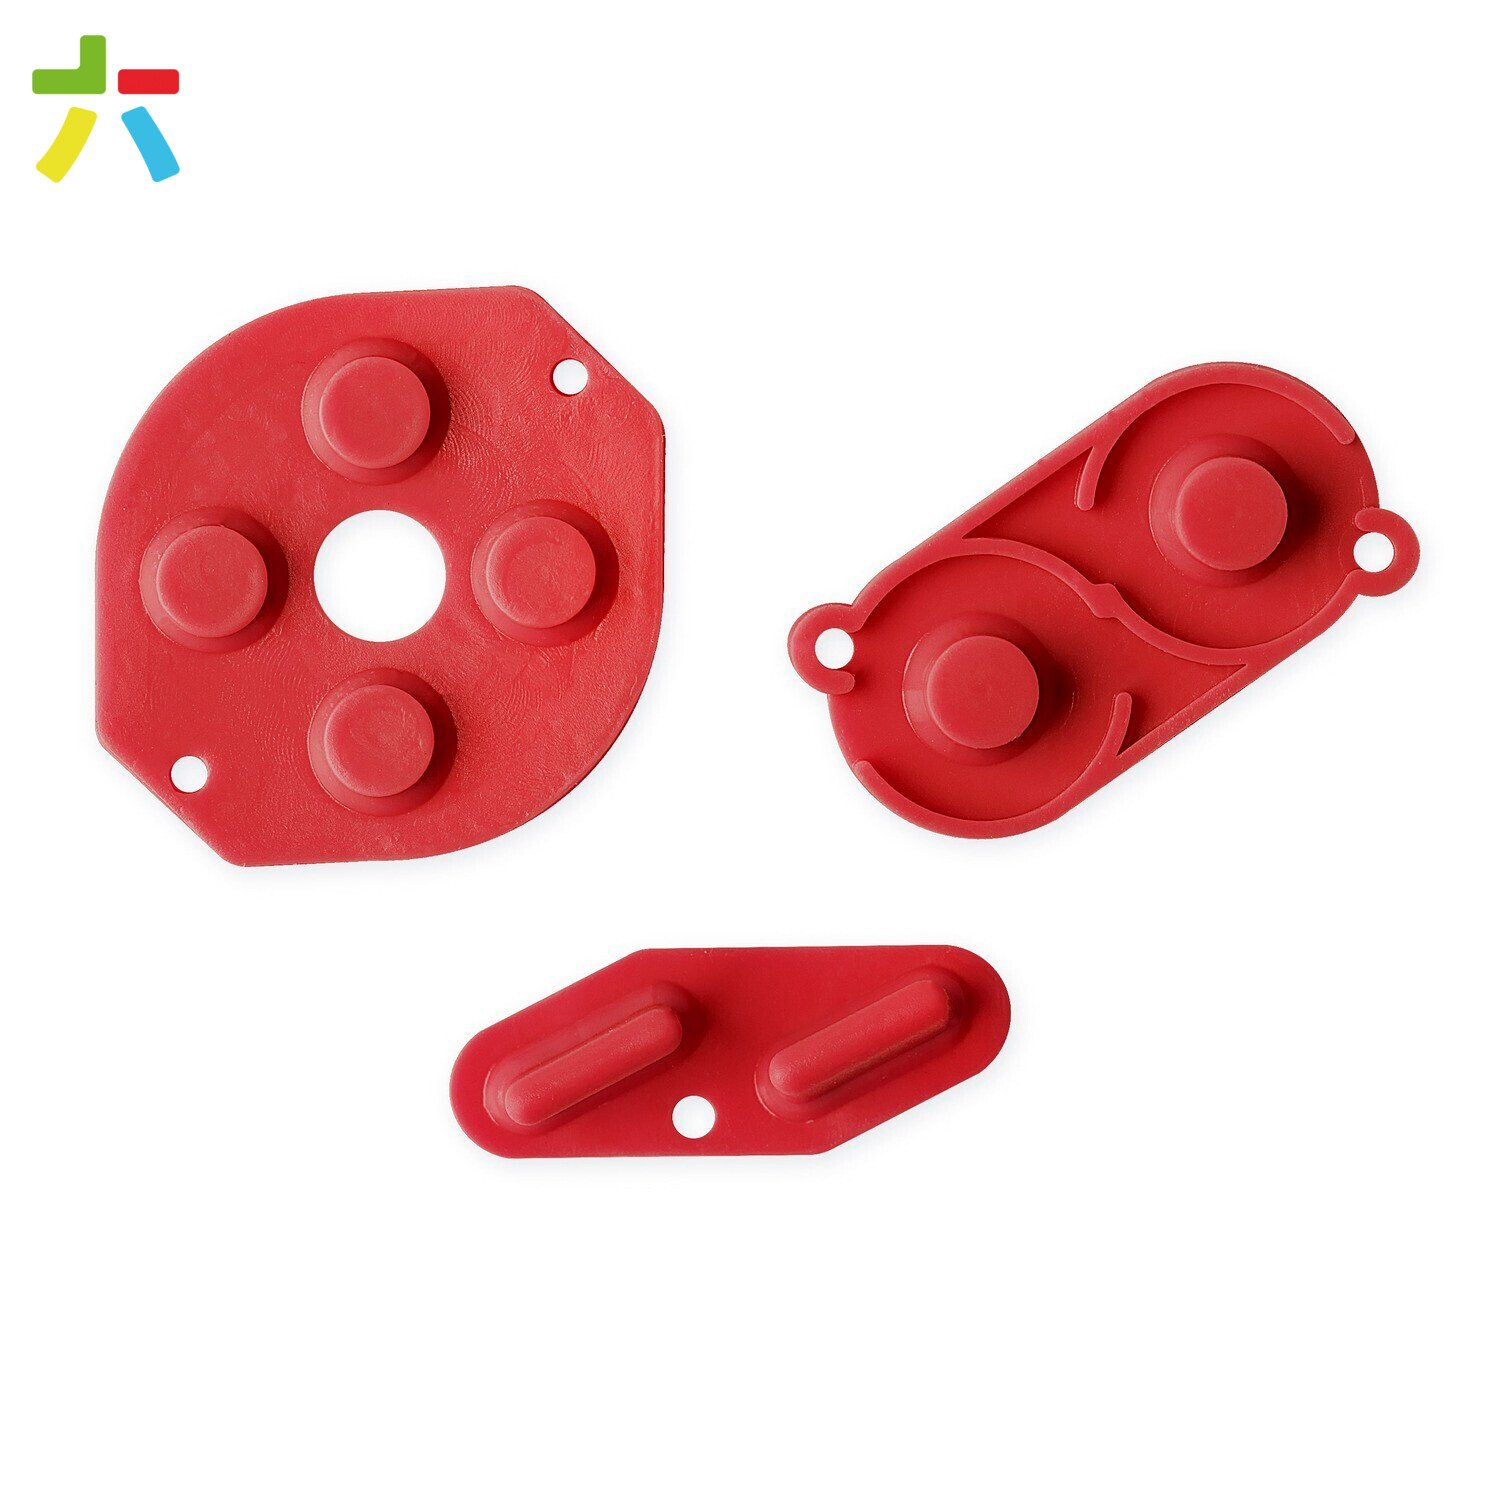 Game Boy Original Rubber Pads (Red)